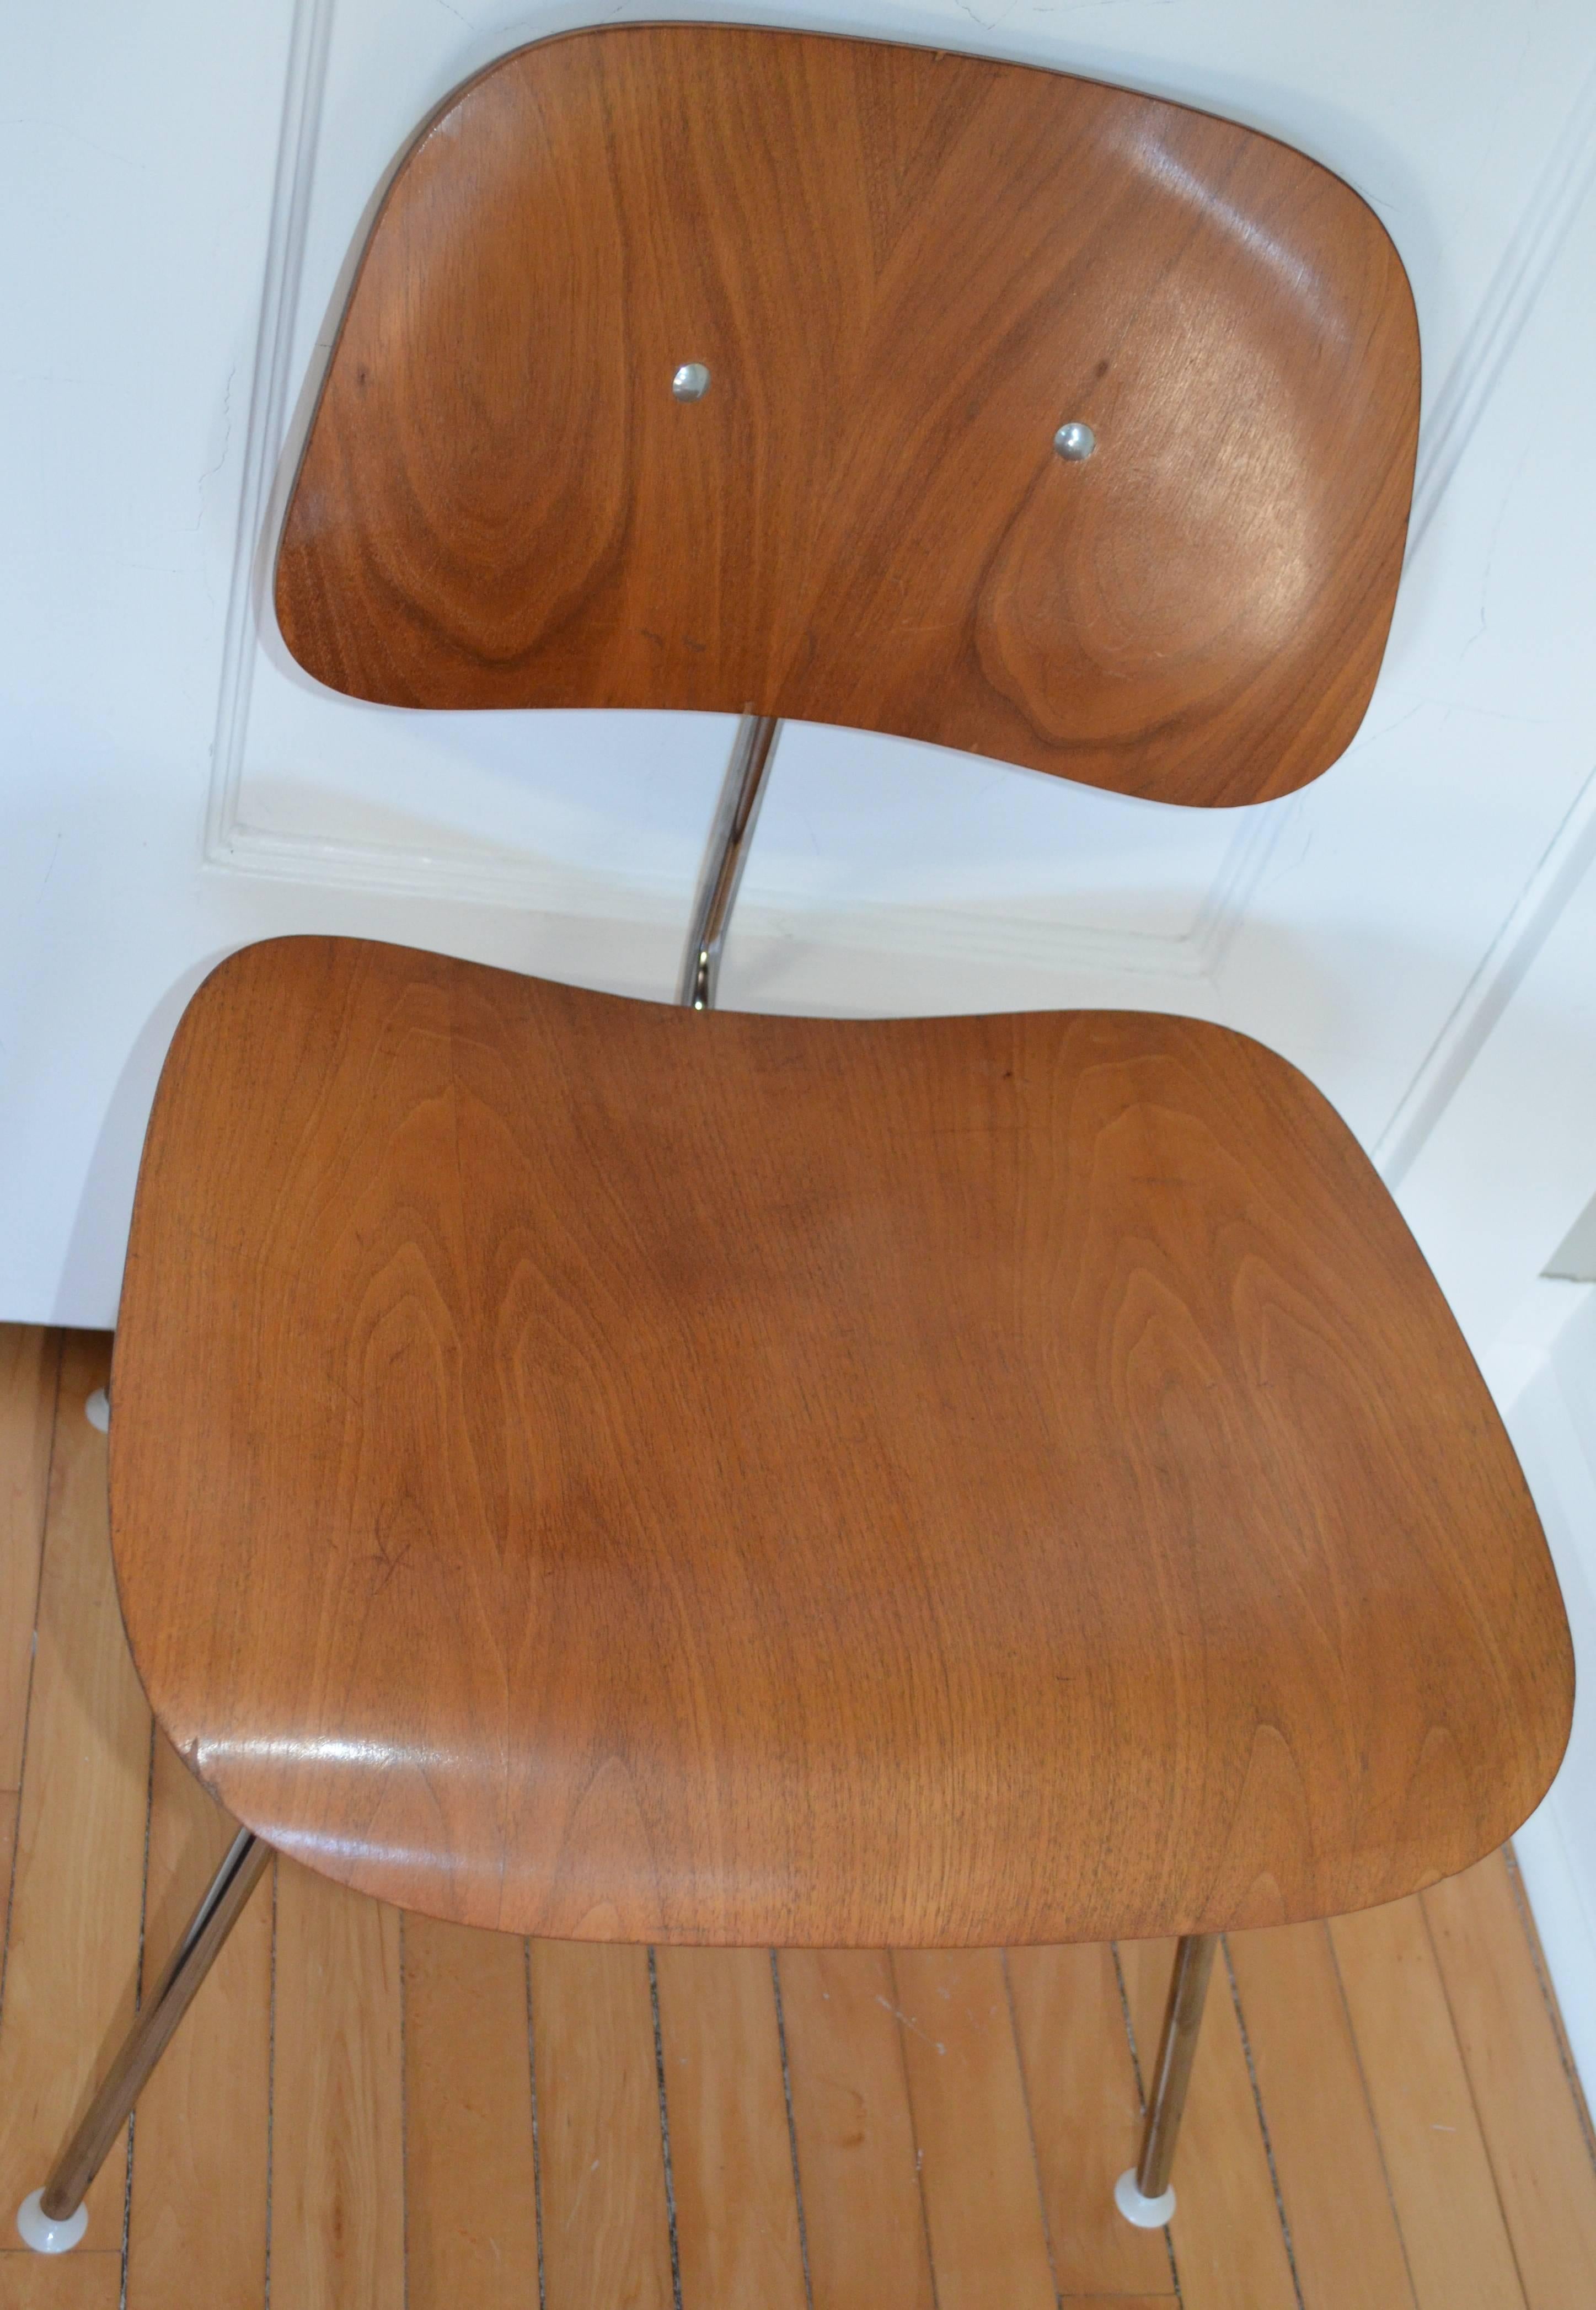 Mid-Century Modern Herman Miller Classic walnut dining room chairs (circa 1950s) with new stainless steel frame from Herman Miller. Price and shipping cost is for one chair. Quantity available. Seat height is 18 inches at front and 16 inches at